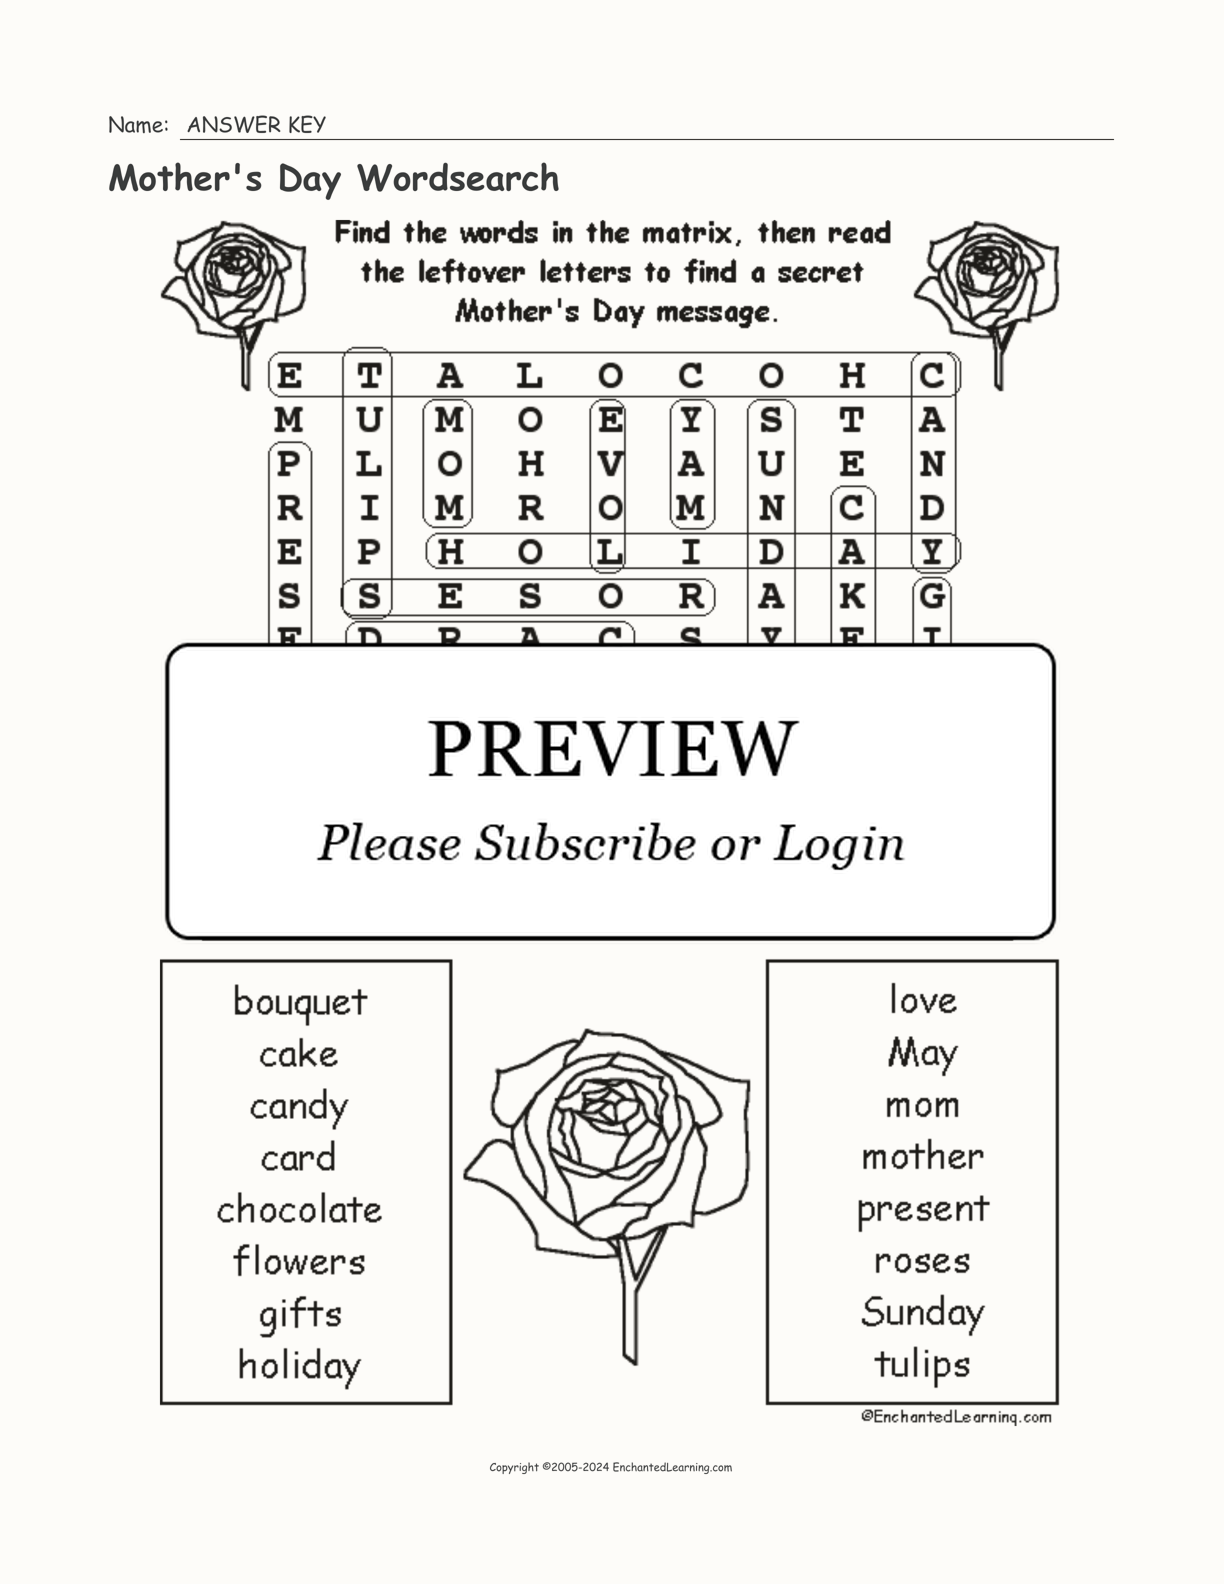 Mother's Day Wordsearch interactive worksheet page 2